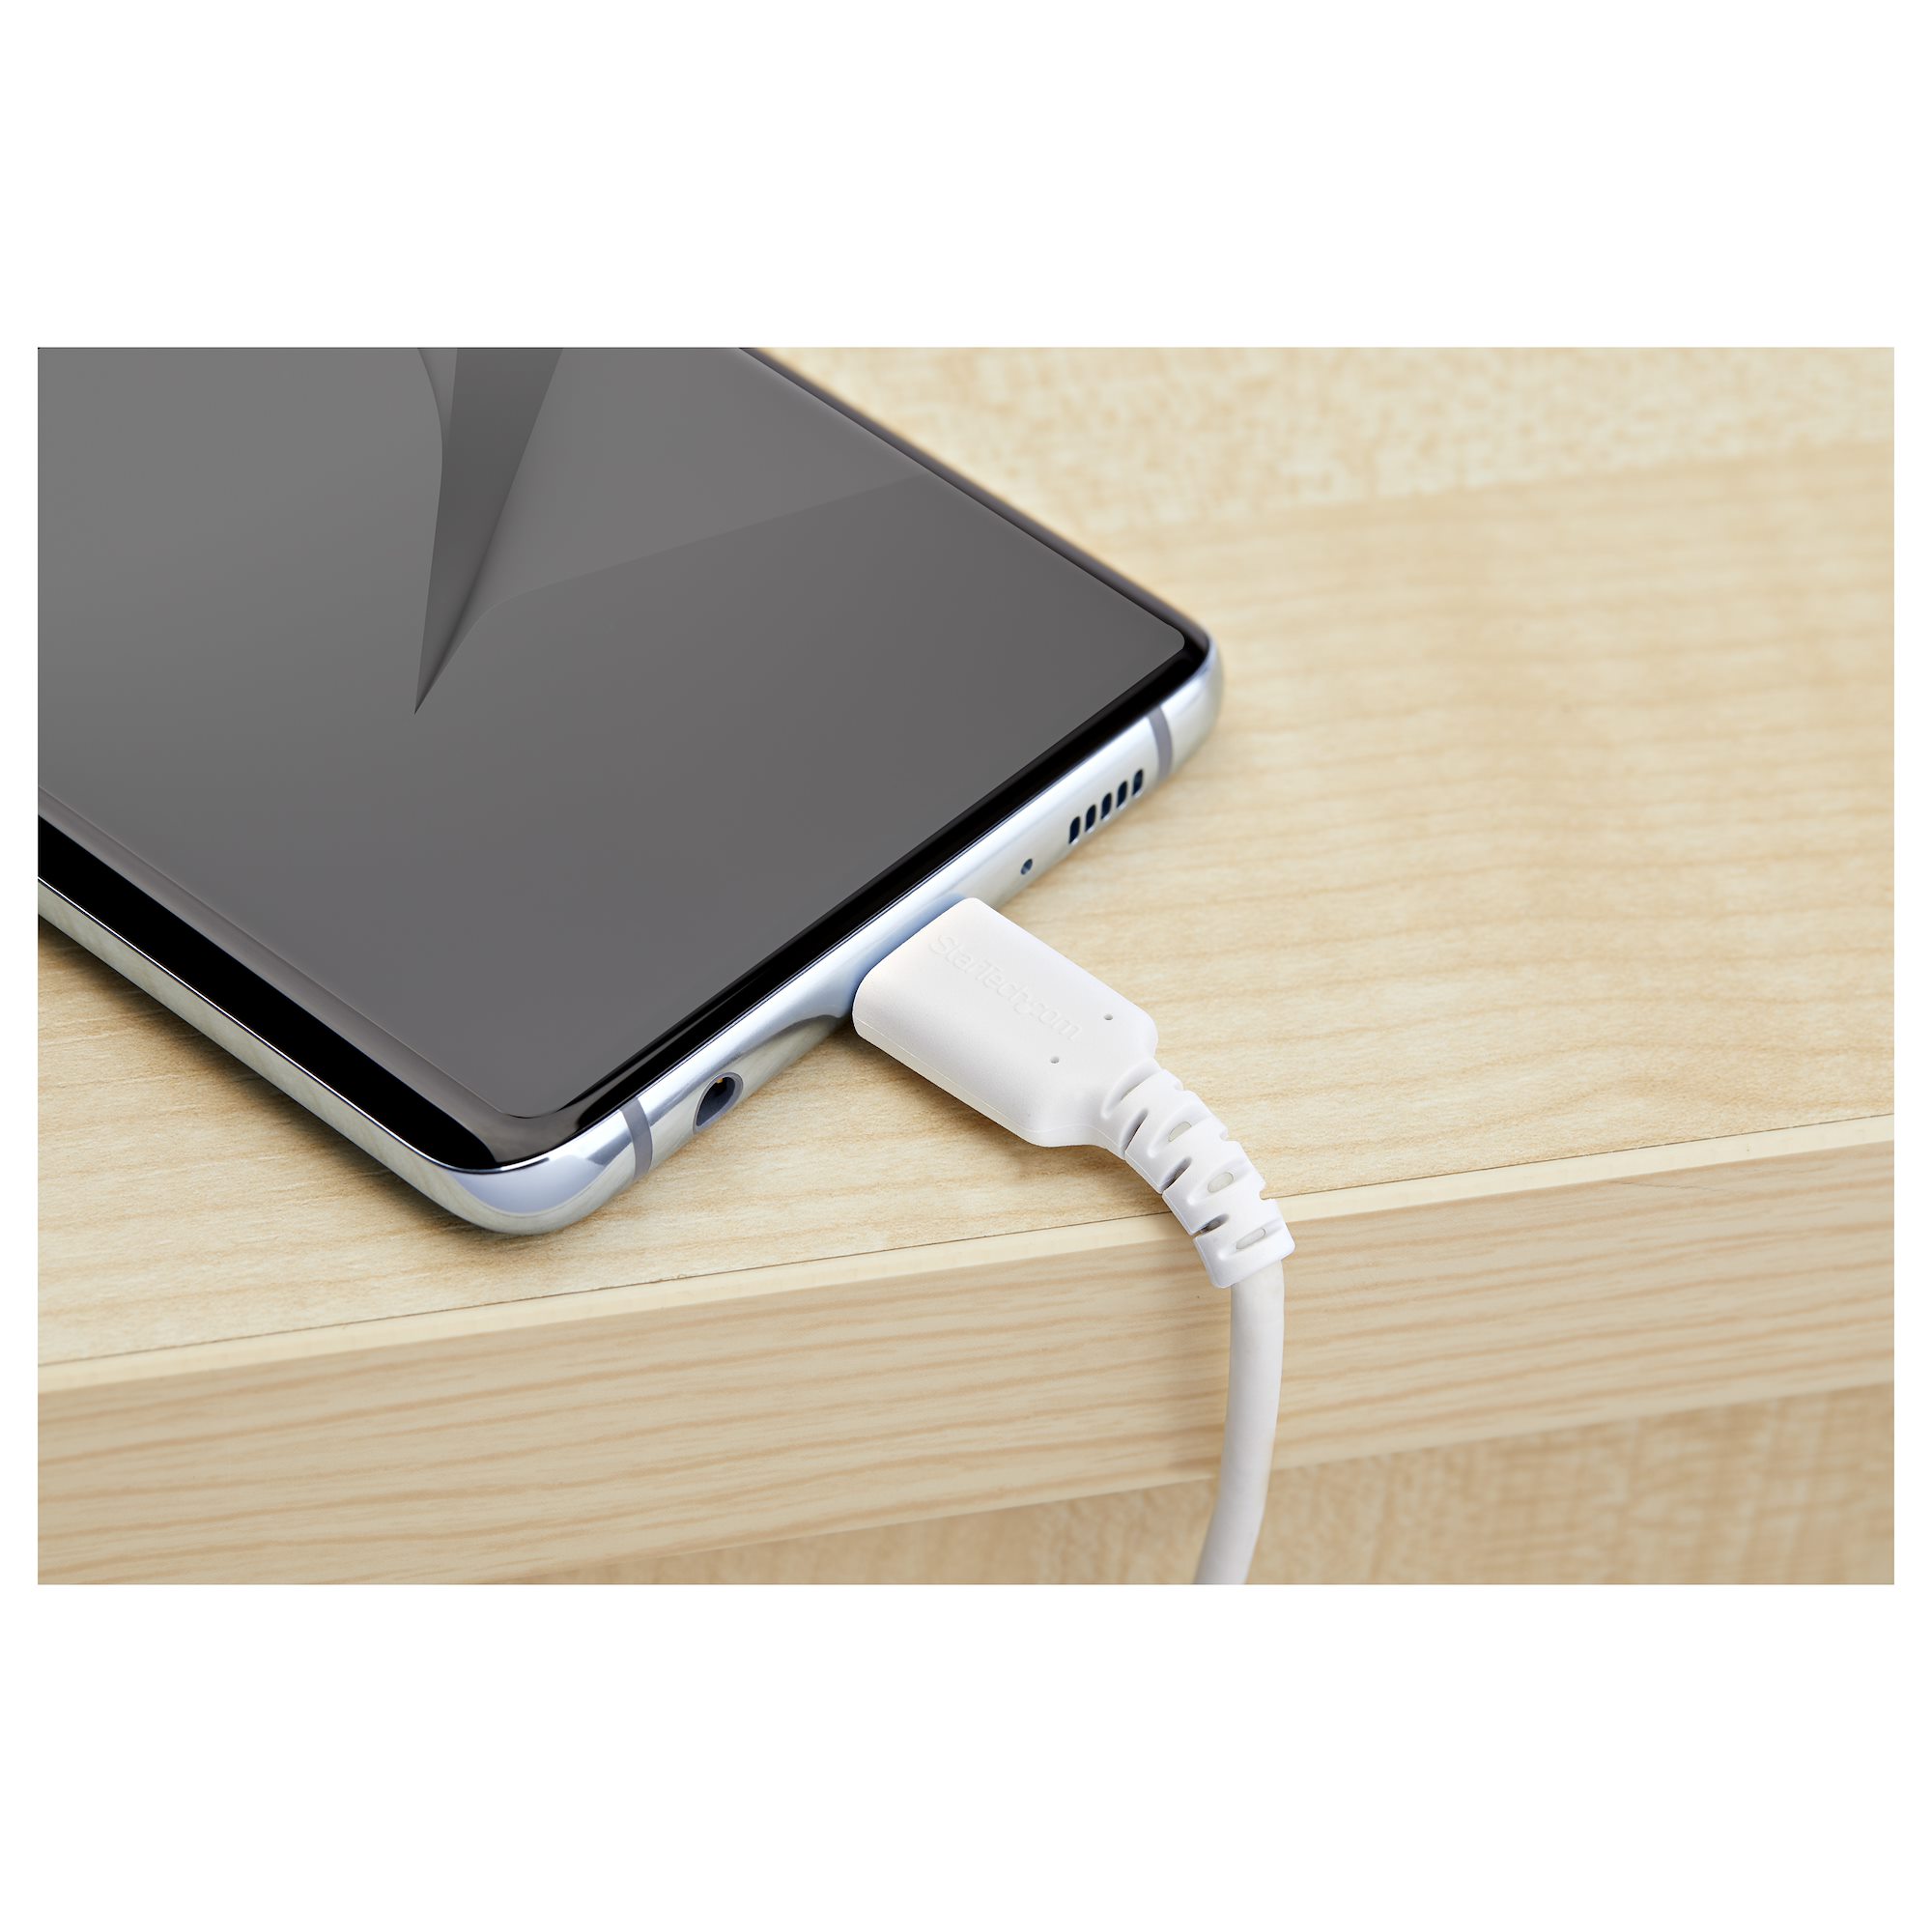 Xiaomi launches a 60W USB-C 2.0 fast charging cable for only $3